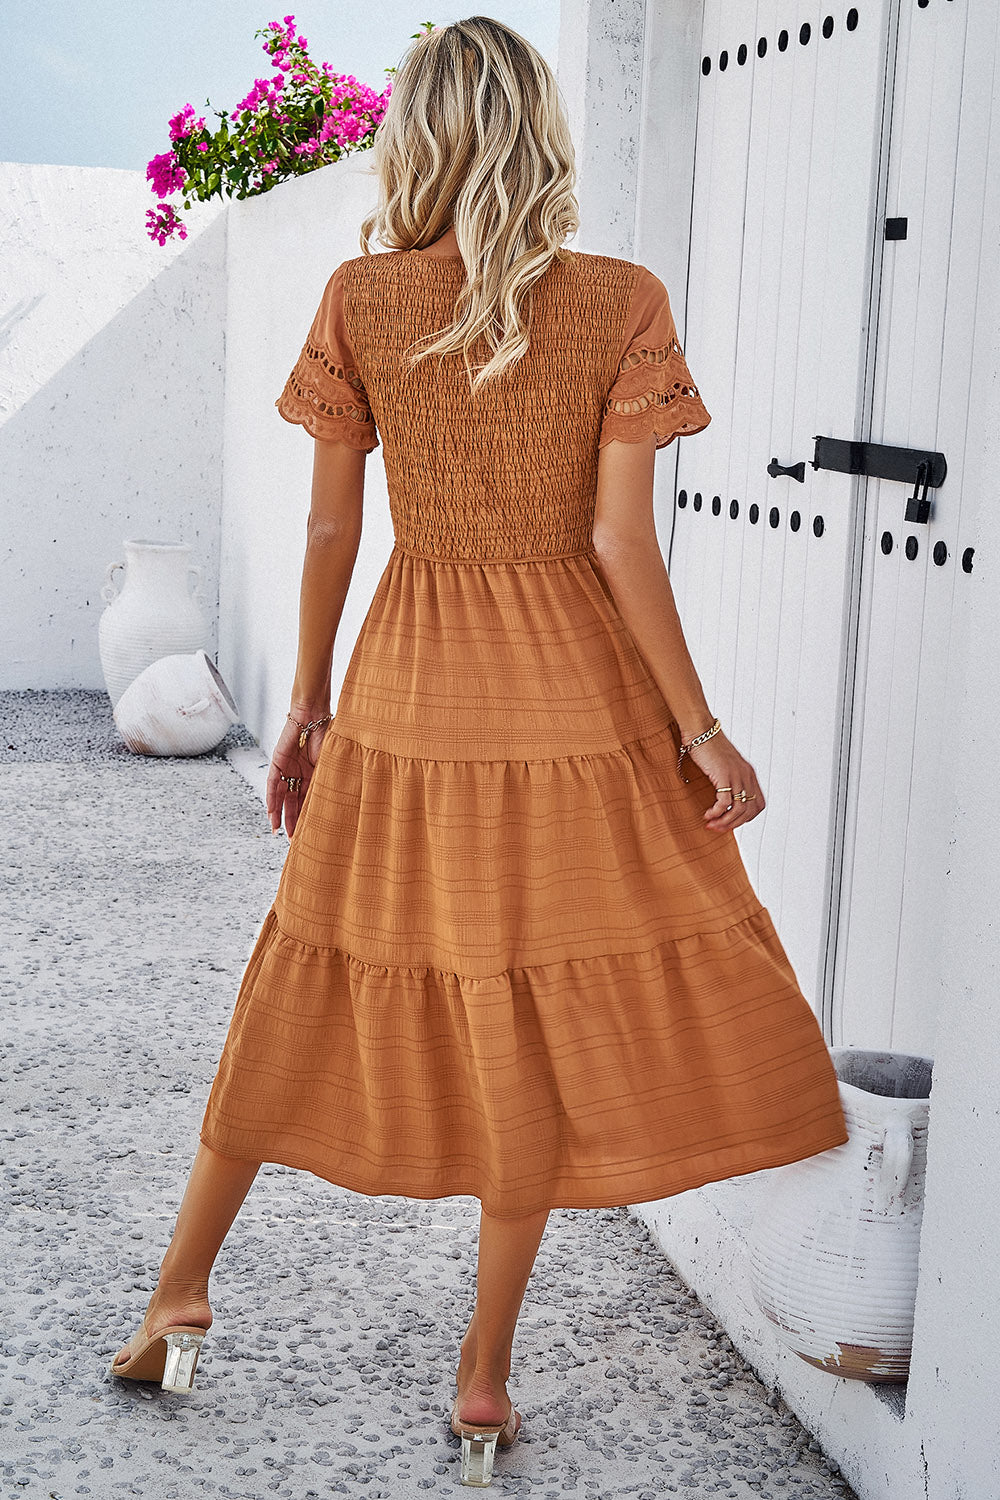 Discover elegance with our Smocked Midi Dress, perfect for any occasion. Comfort meets style in five beautiful colors.